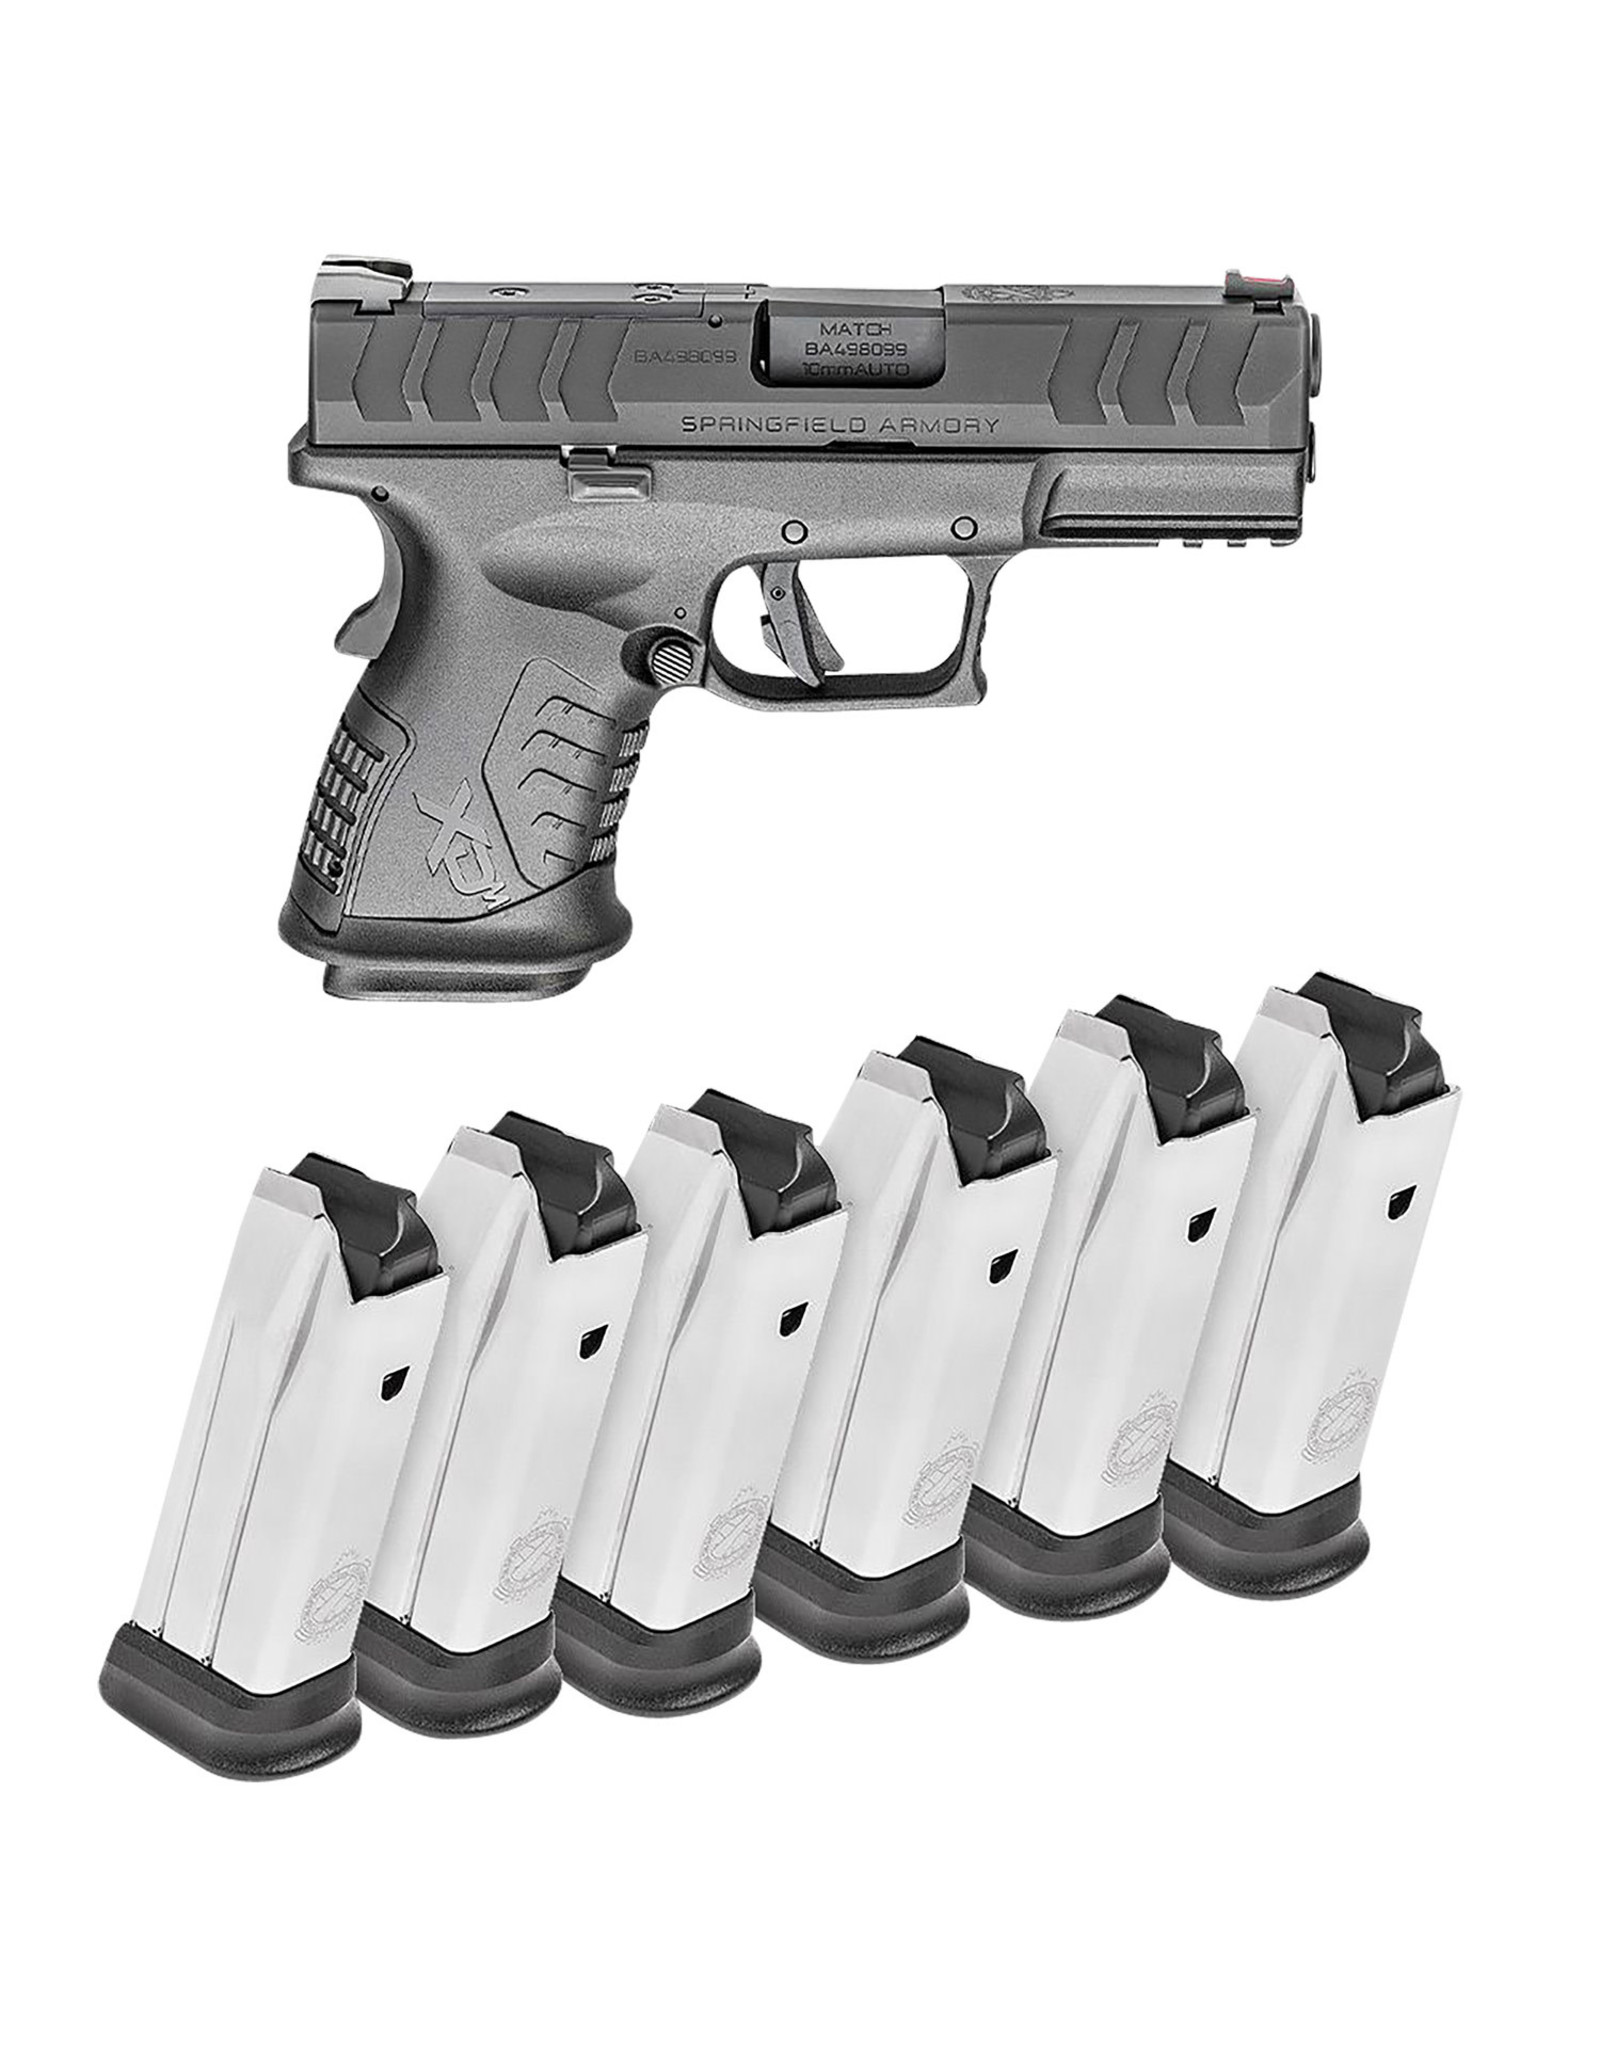 Springfield XD-M Elite OSP 10mm 3.8" bbl 11+1 Rounds - w/ 5 Mags + Bag